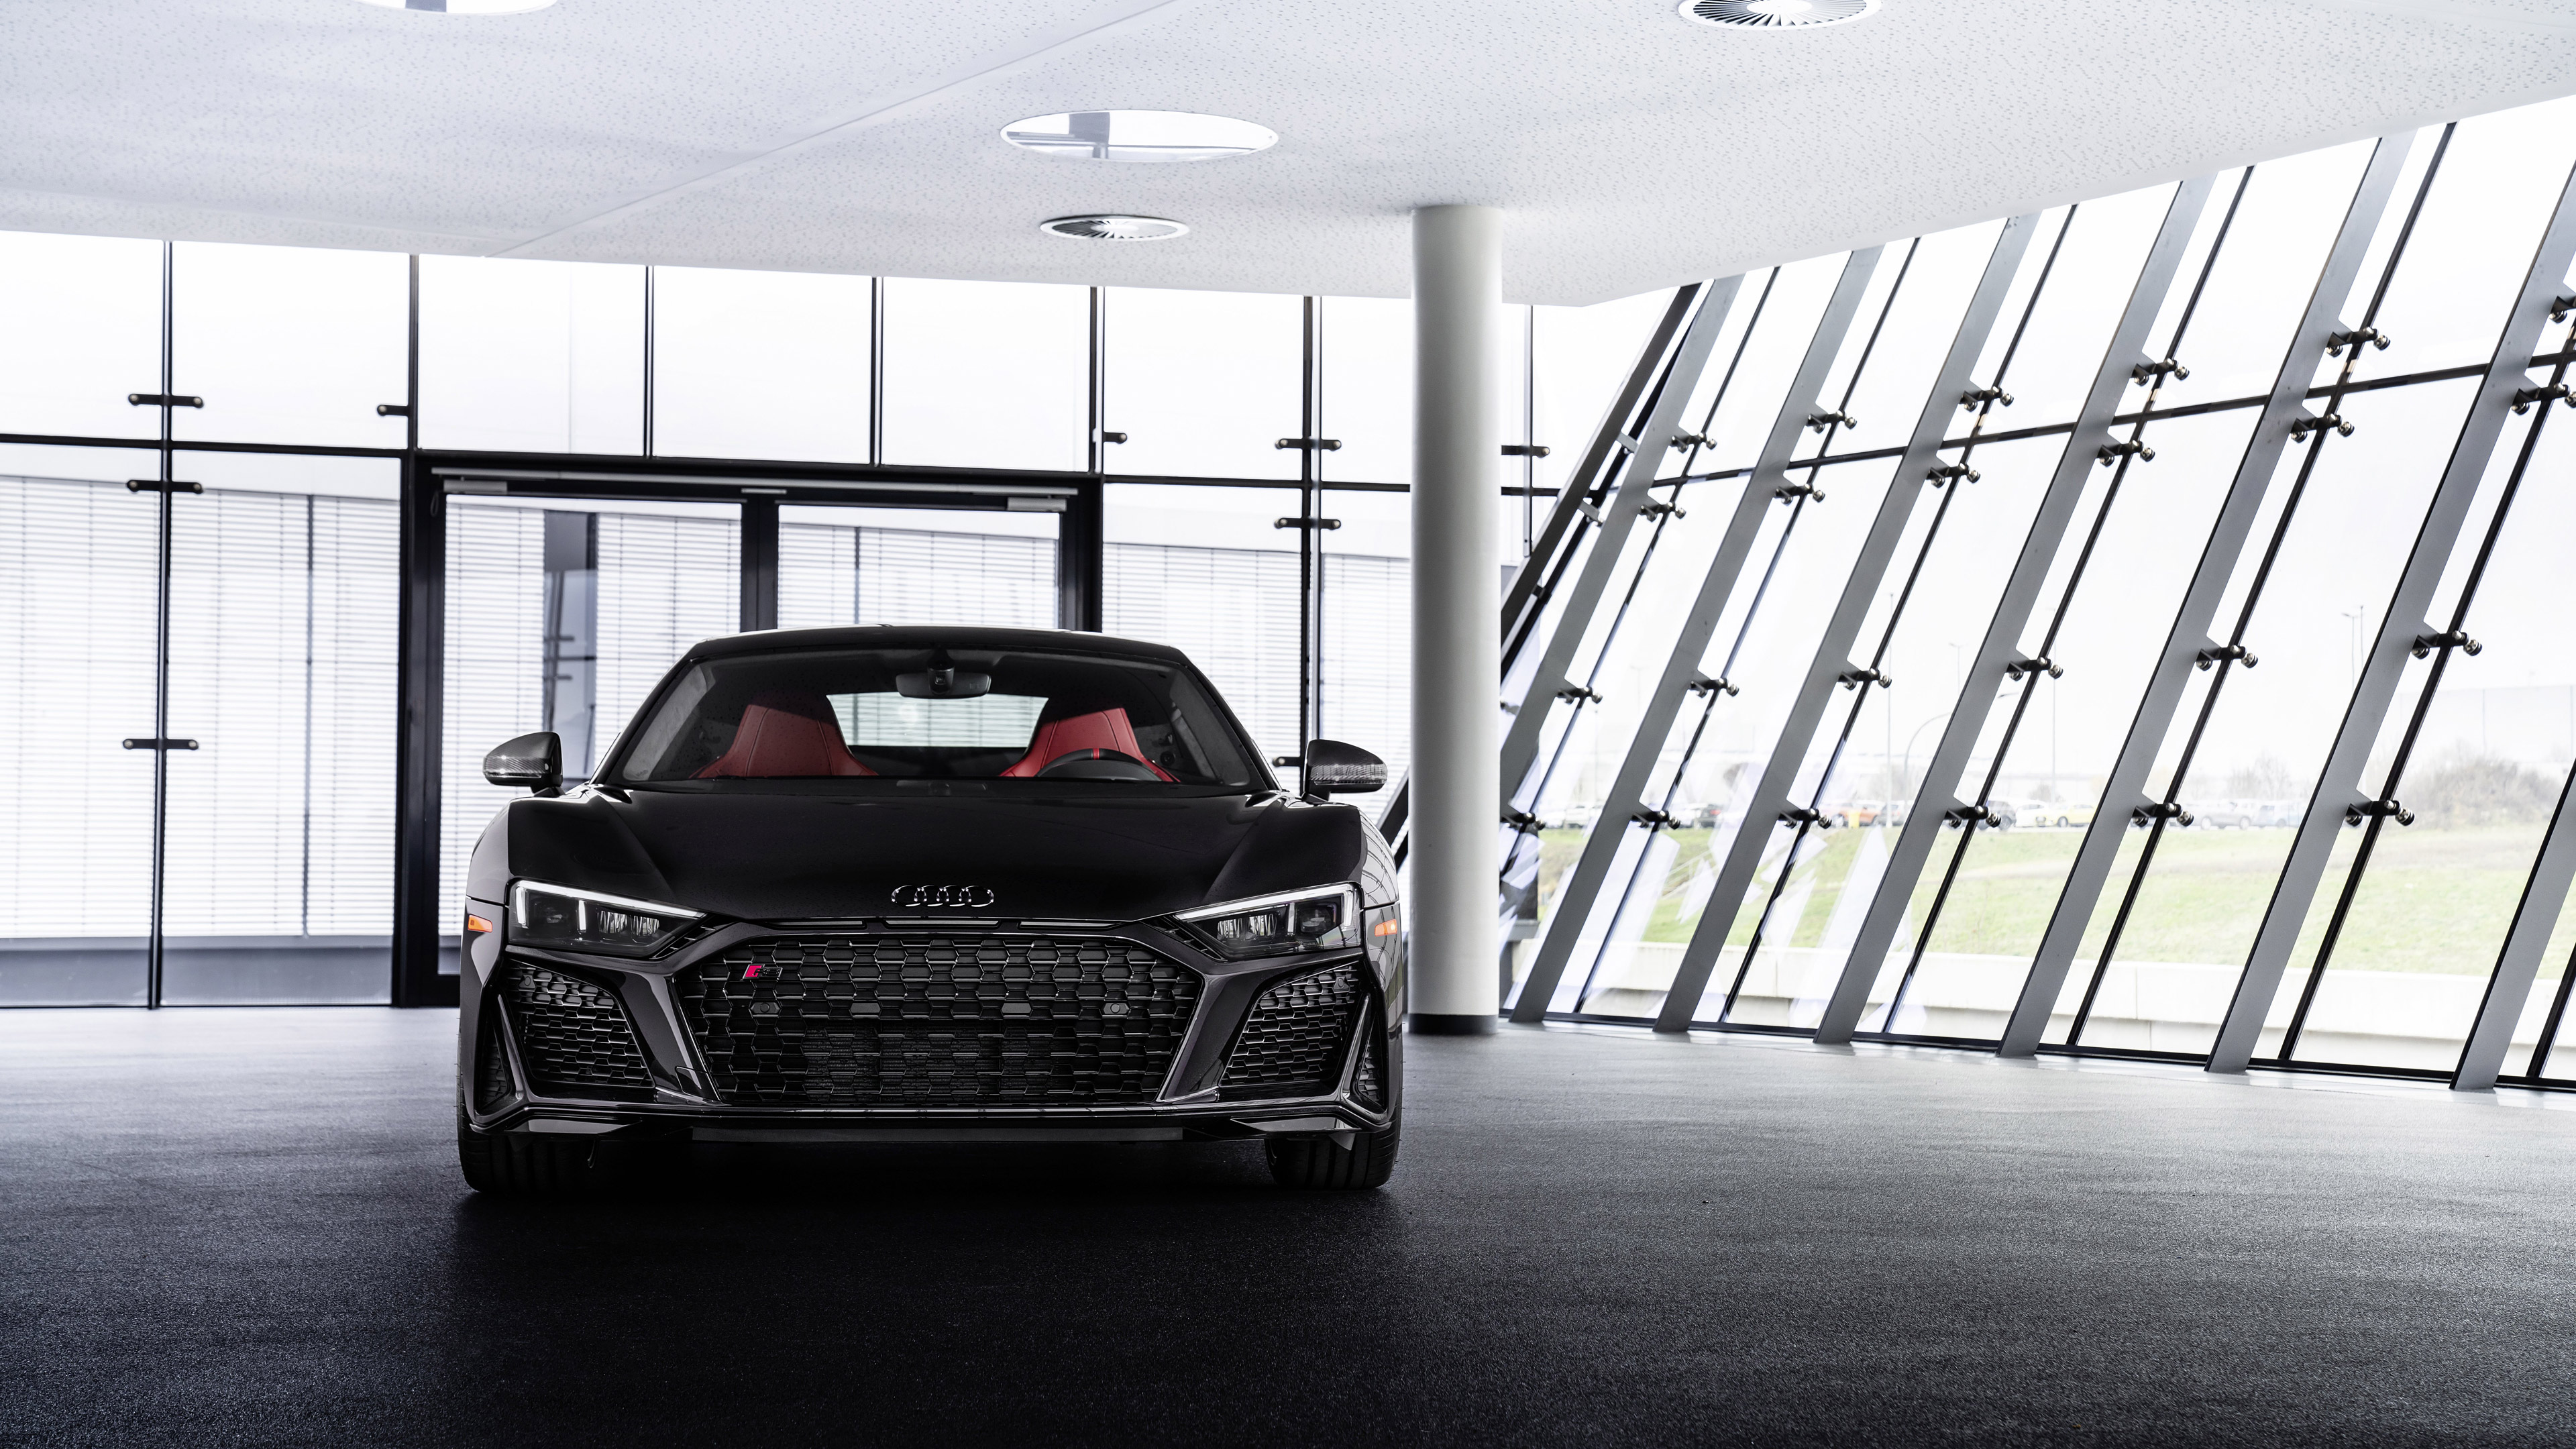  2021 Audi R8 RWD Panther Edition Wallpaper.